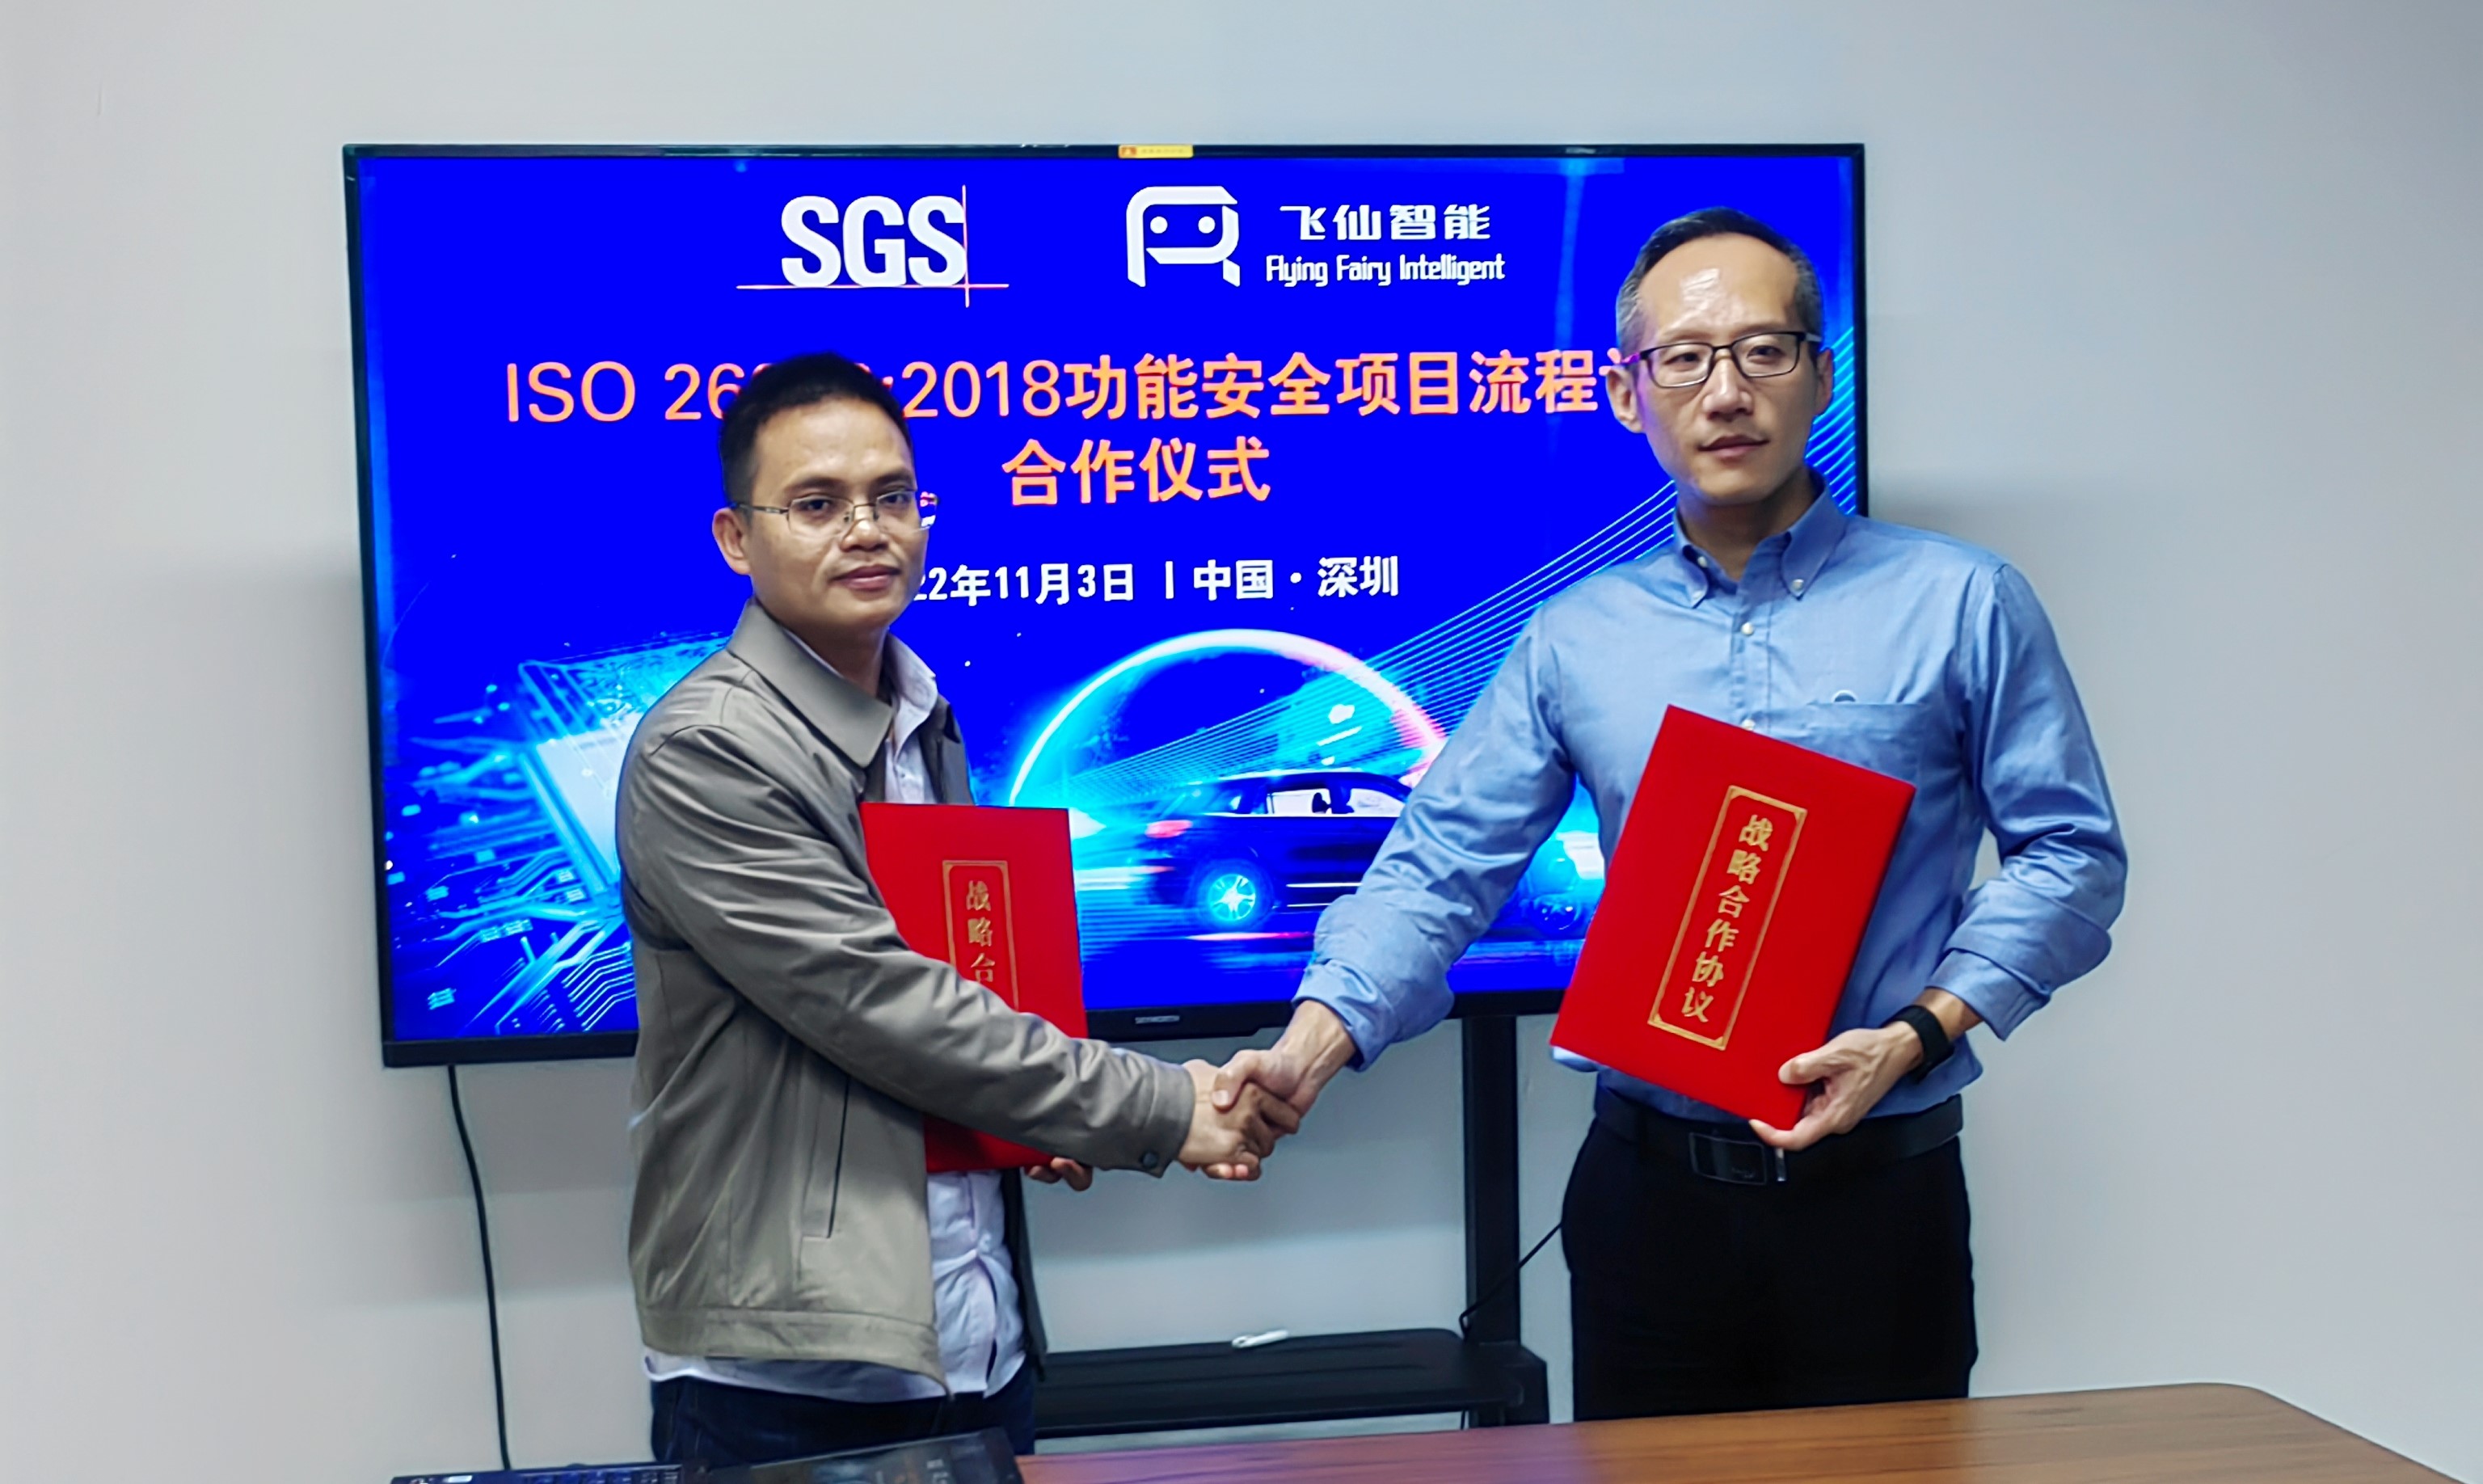 SGS and Flying Fairy Intelligent Reached The Cooperation of 